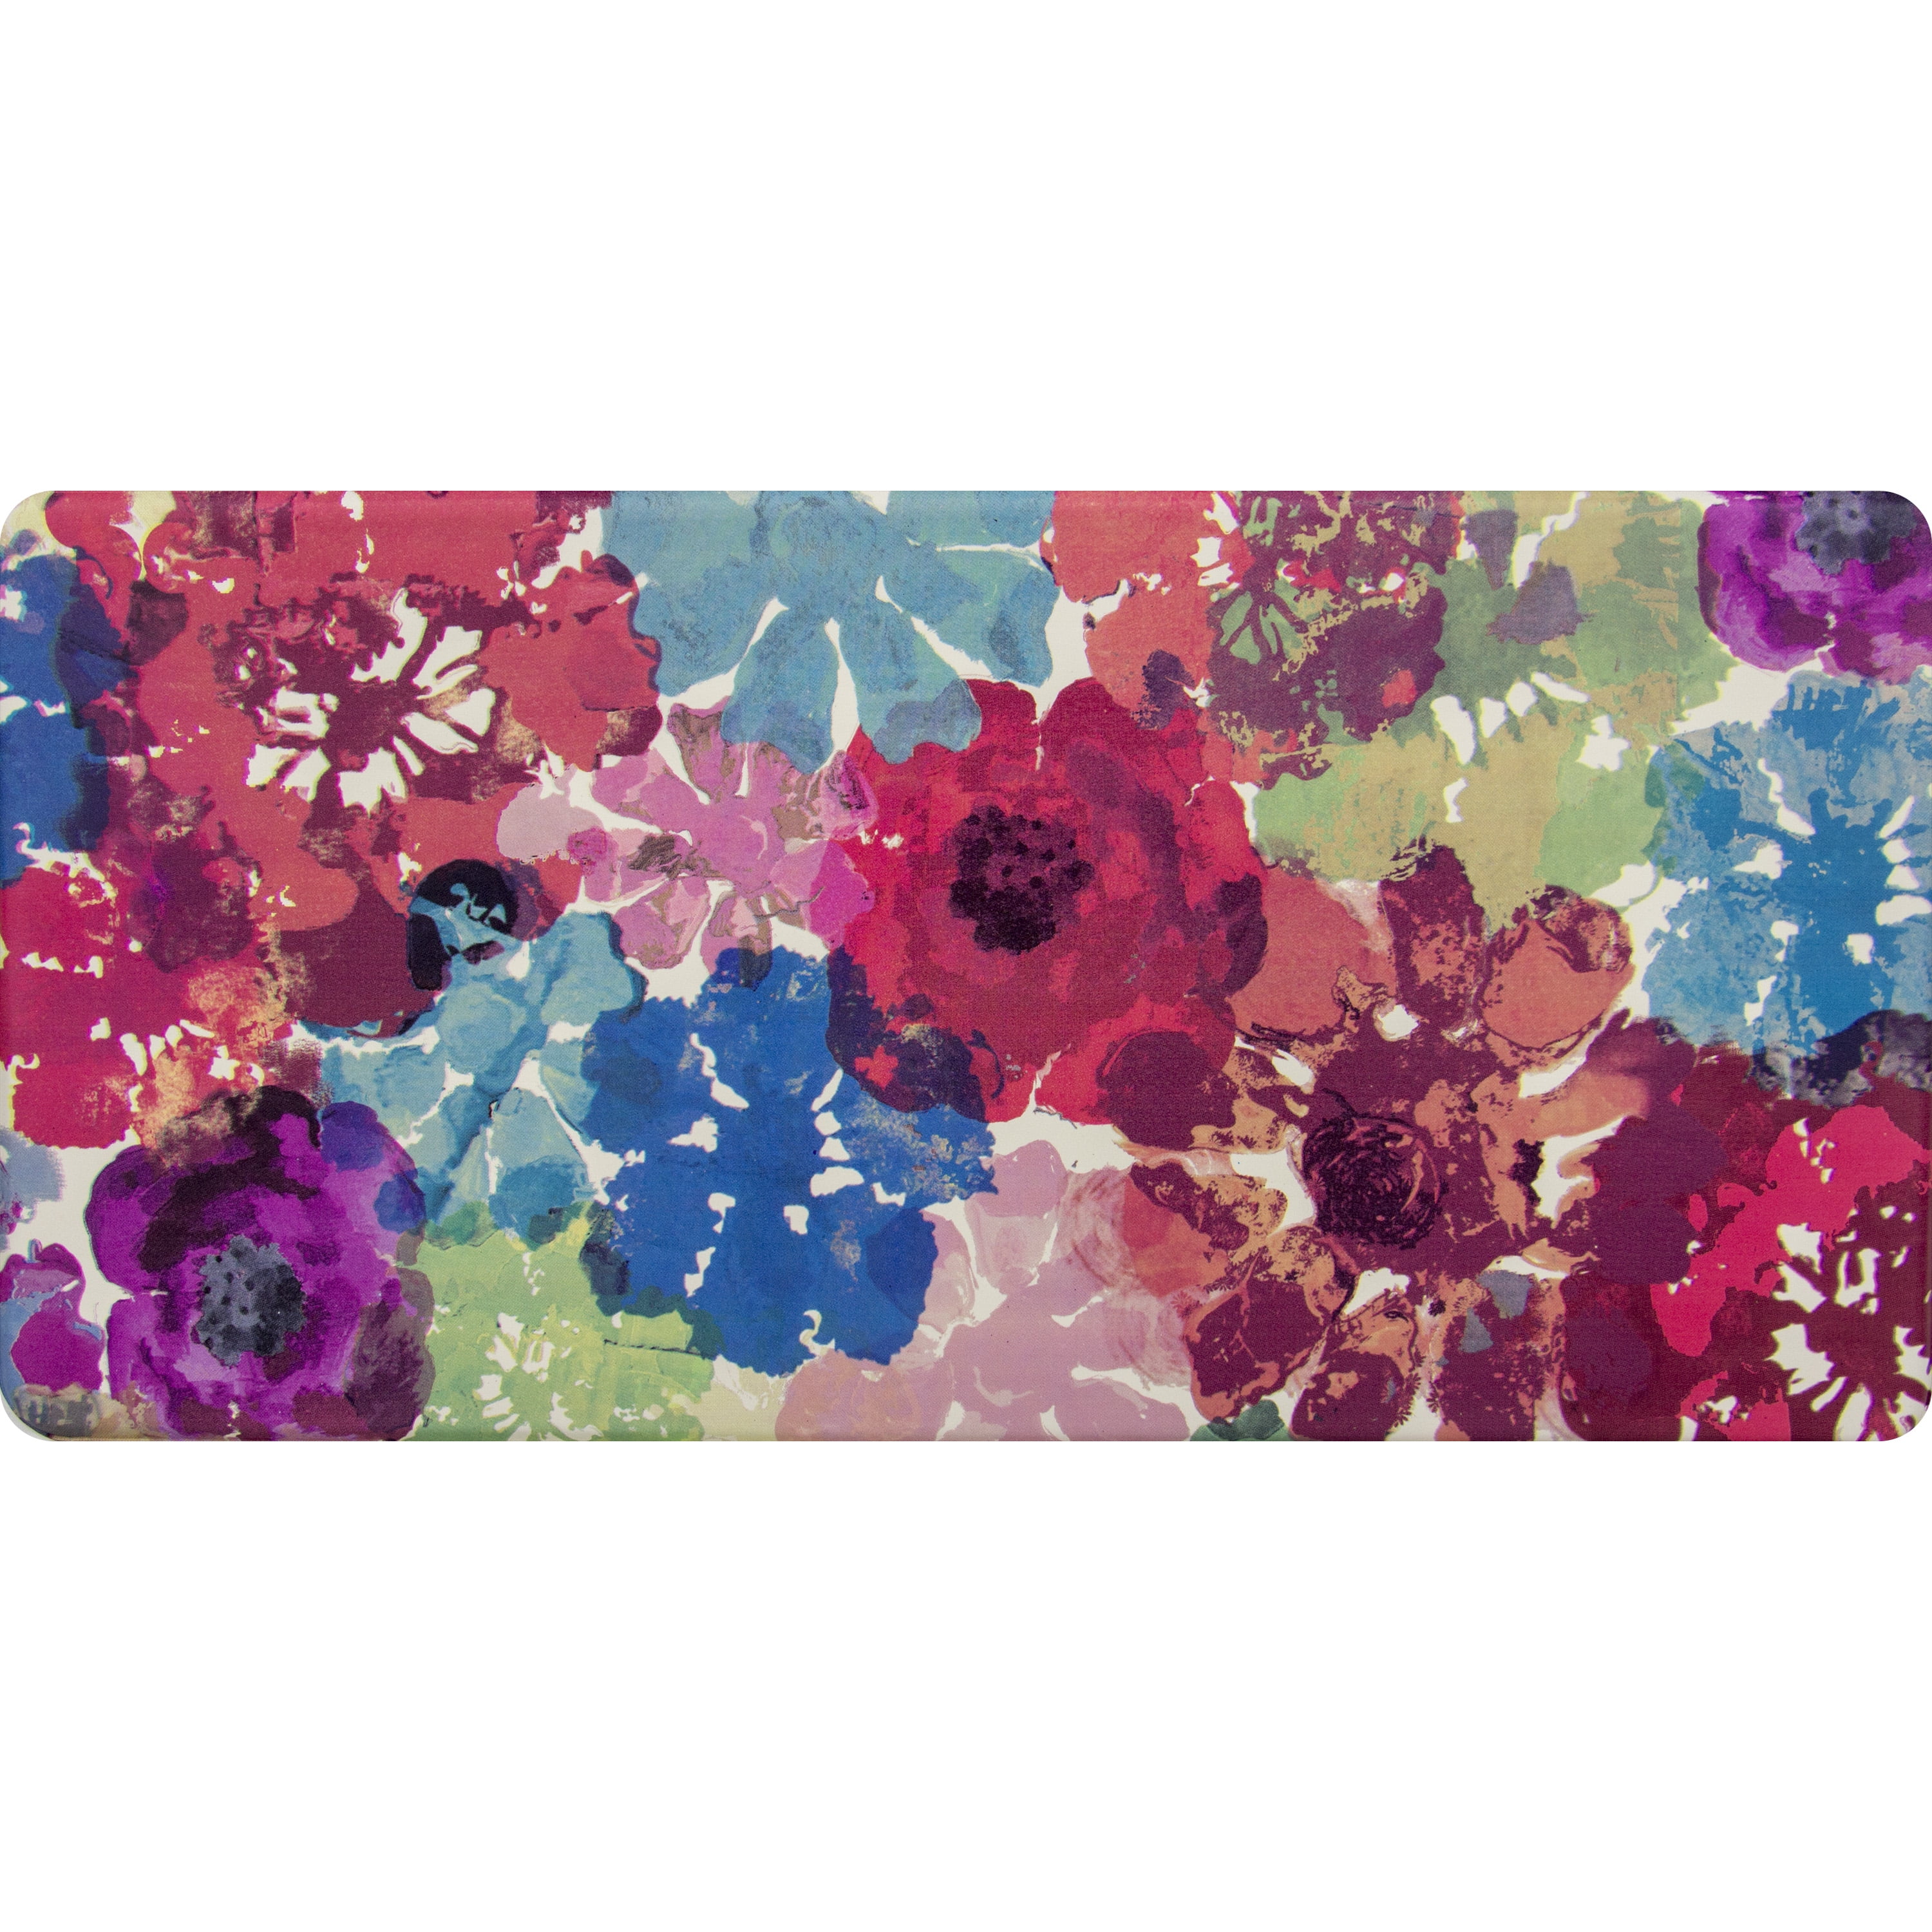 Kitchen Rugs Set of 2,Happy Mother's Day Floral Kitchen Mats Rugs Non Skid Washable Anti Fatiguee,Watercolor Flower Water Absorption Doormat Carpet for Bedroom/Bathroom/Living Room